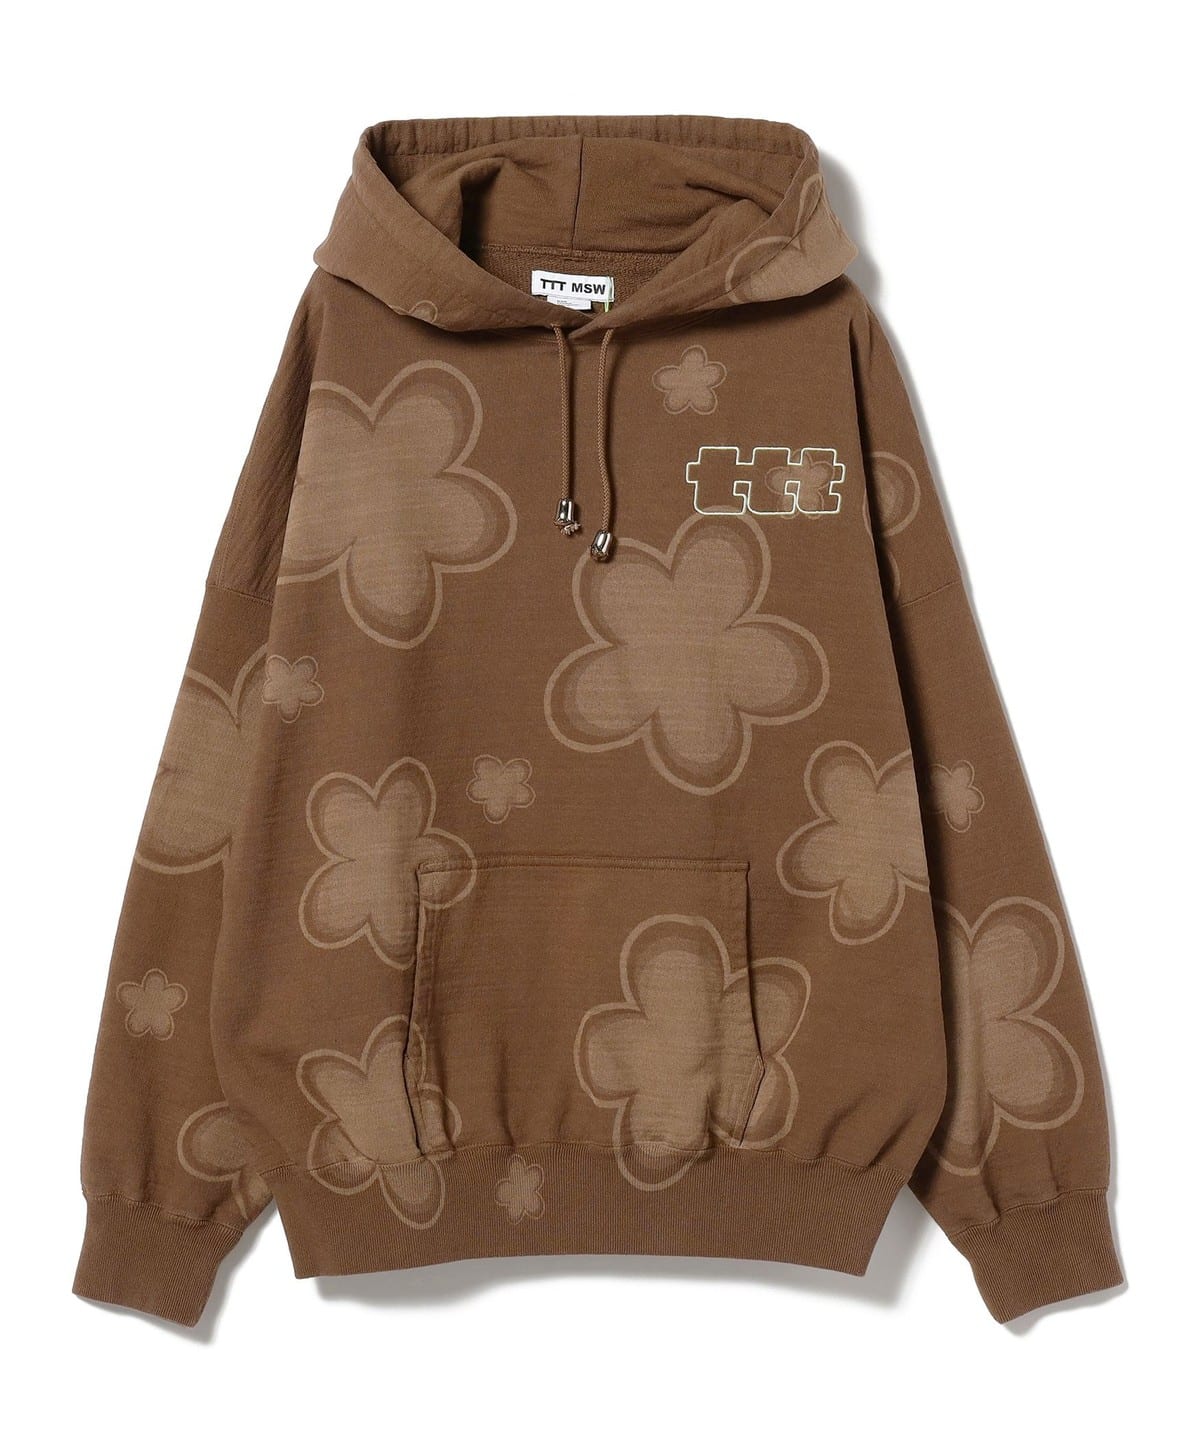 BEAMS（ビームス）TTTMSW / Flower hoodie（トップス パーカー）通販 ...